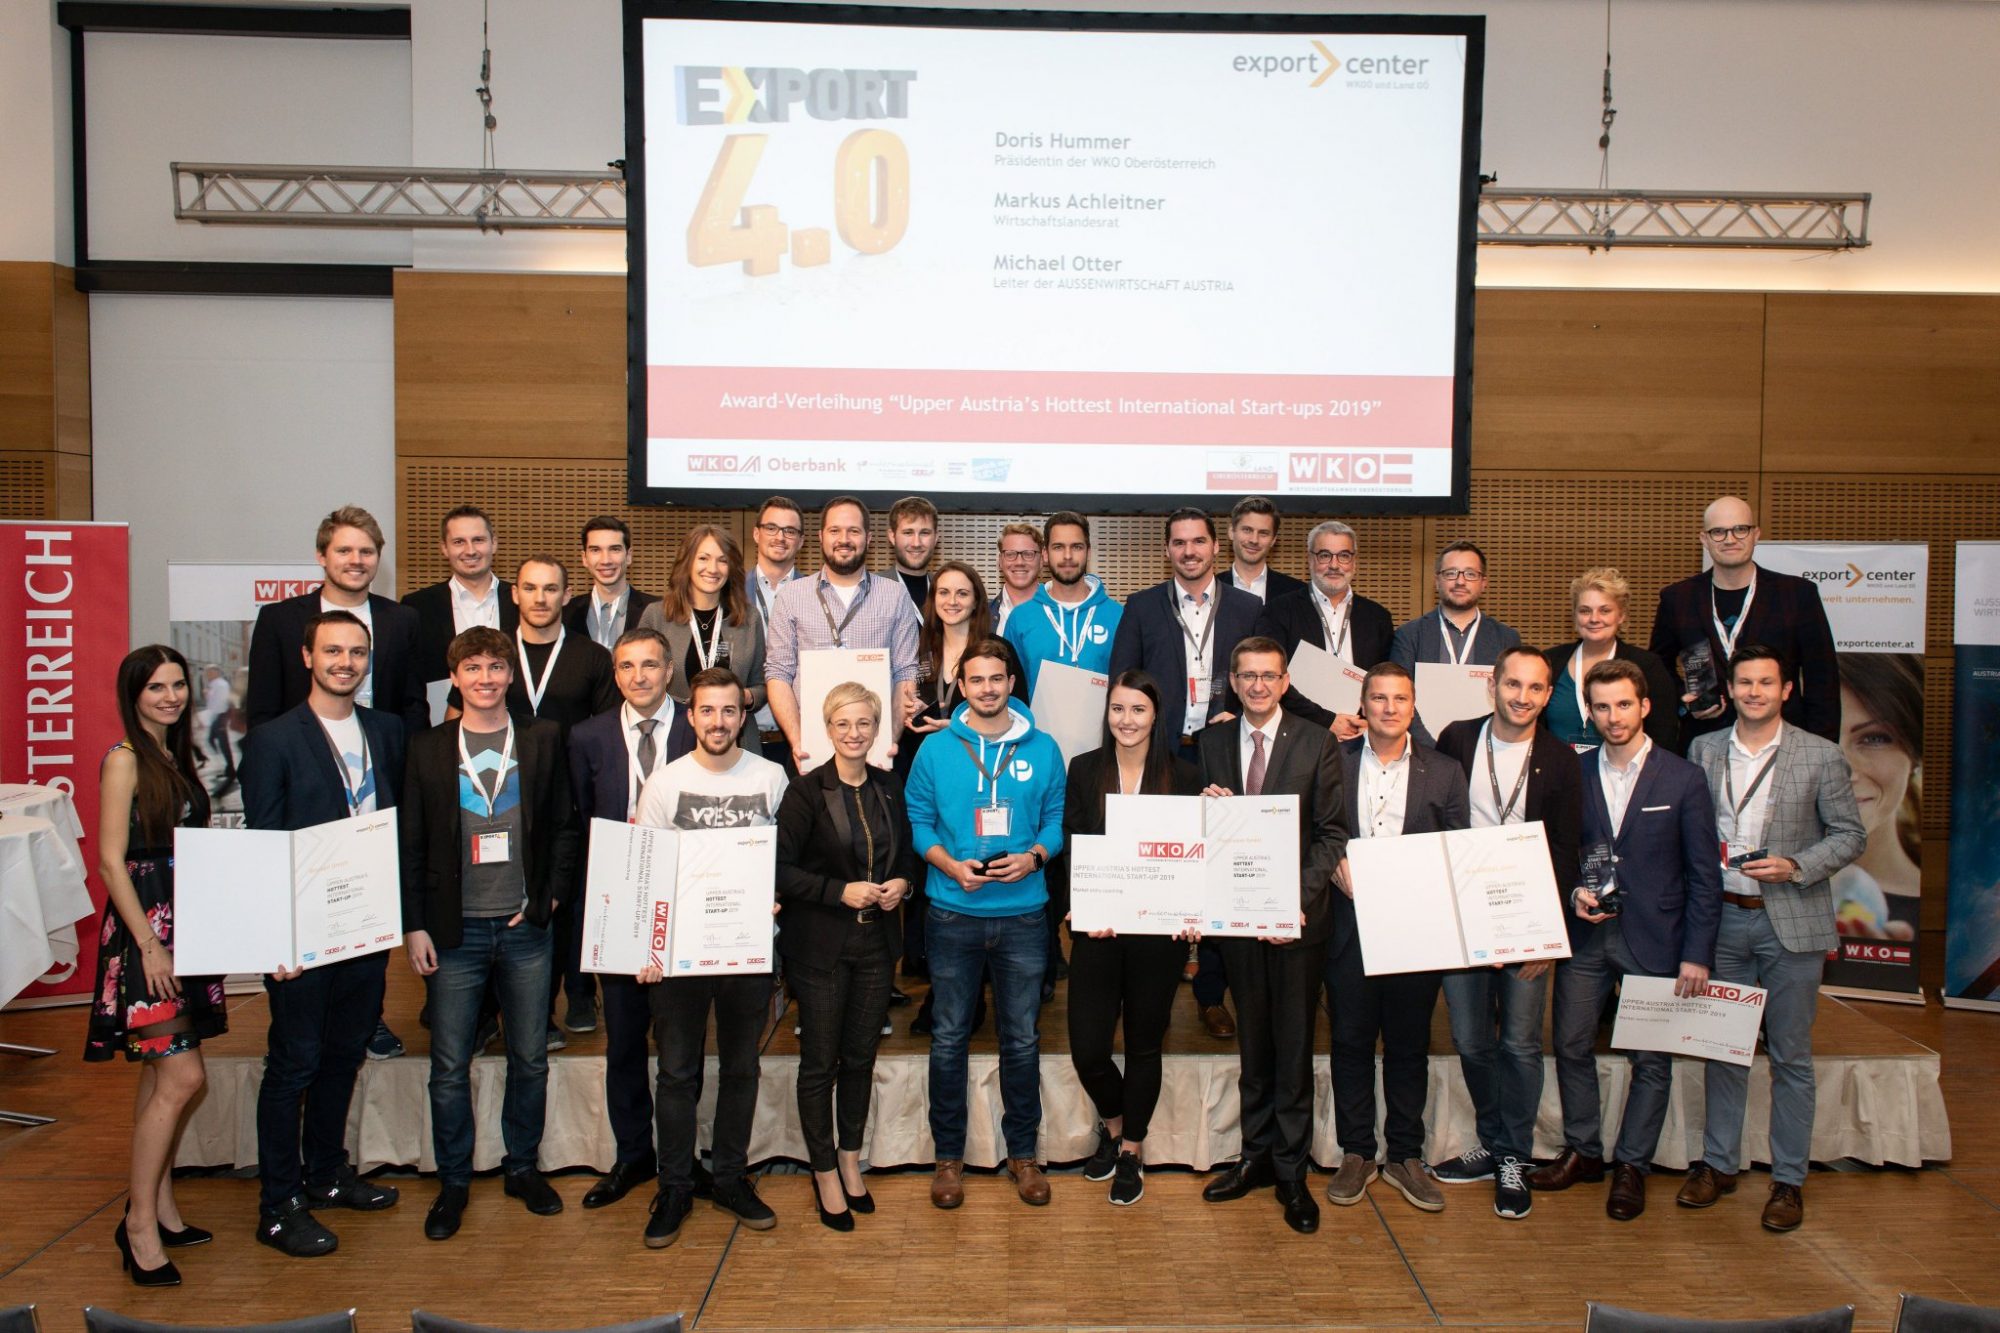 Upper-Austria-Hottest-Startup-group-picture